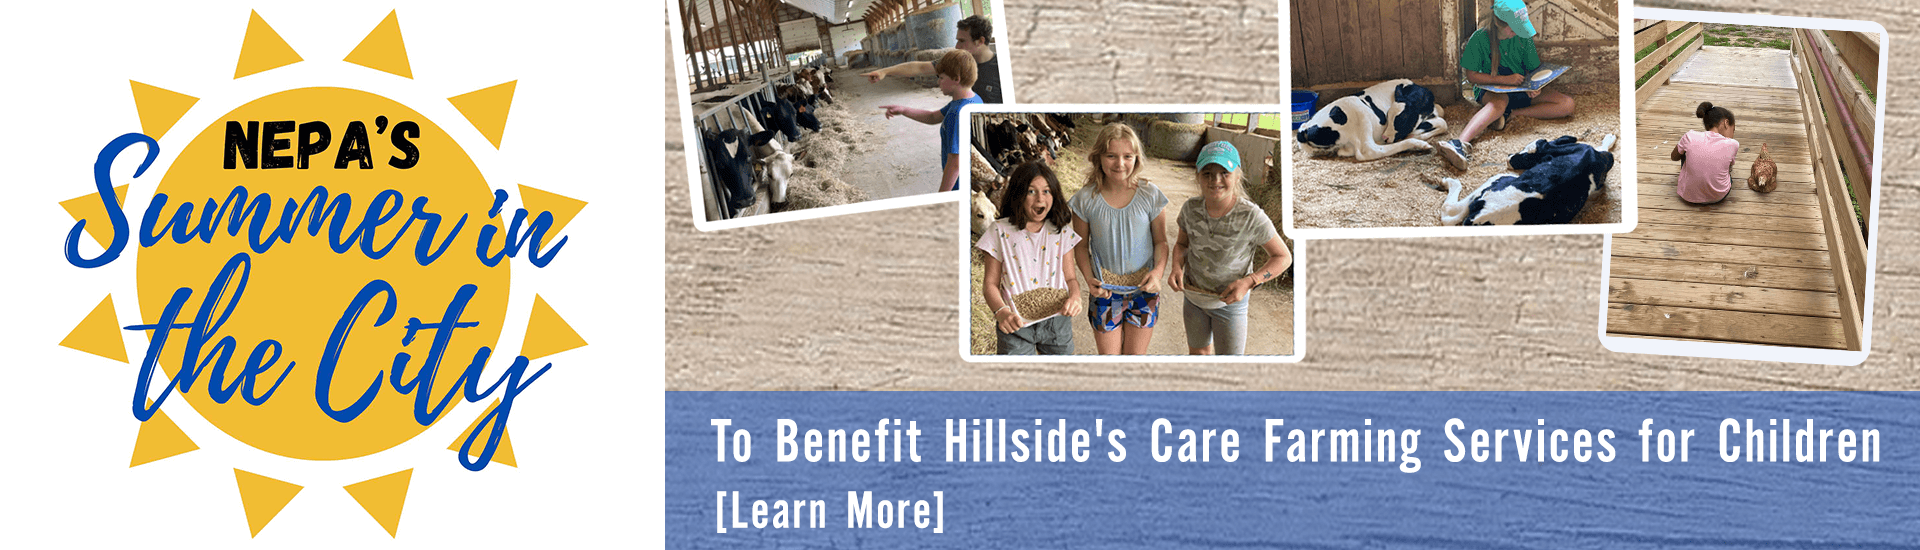 NEPA Summer in the City to benefit Hillside's Care Farming Services for Children